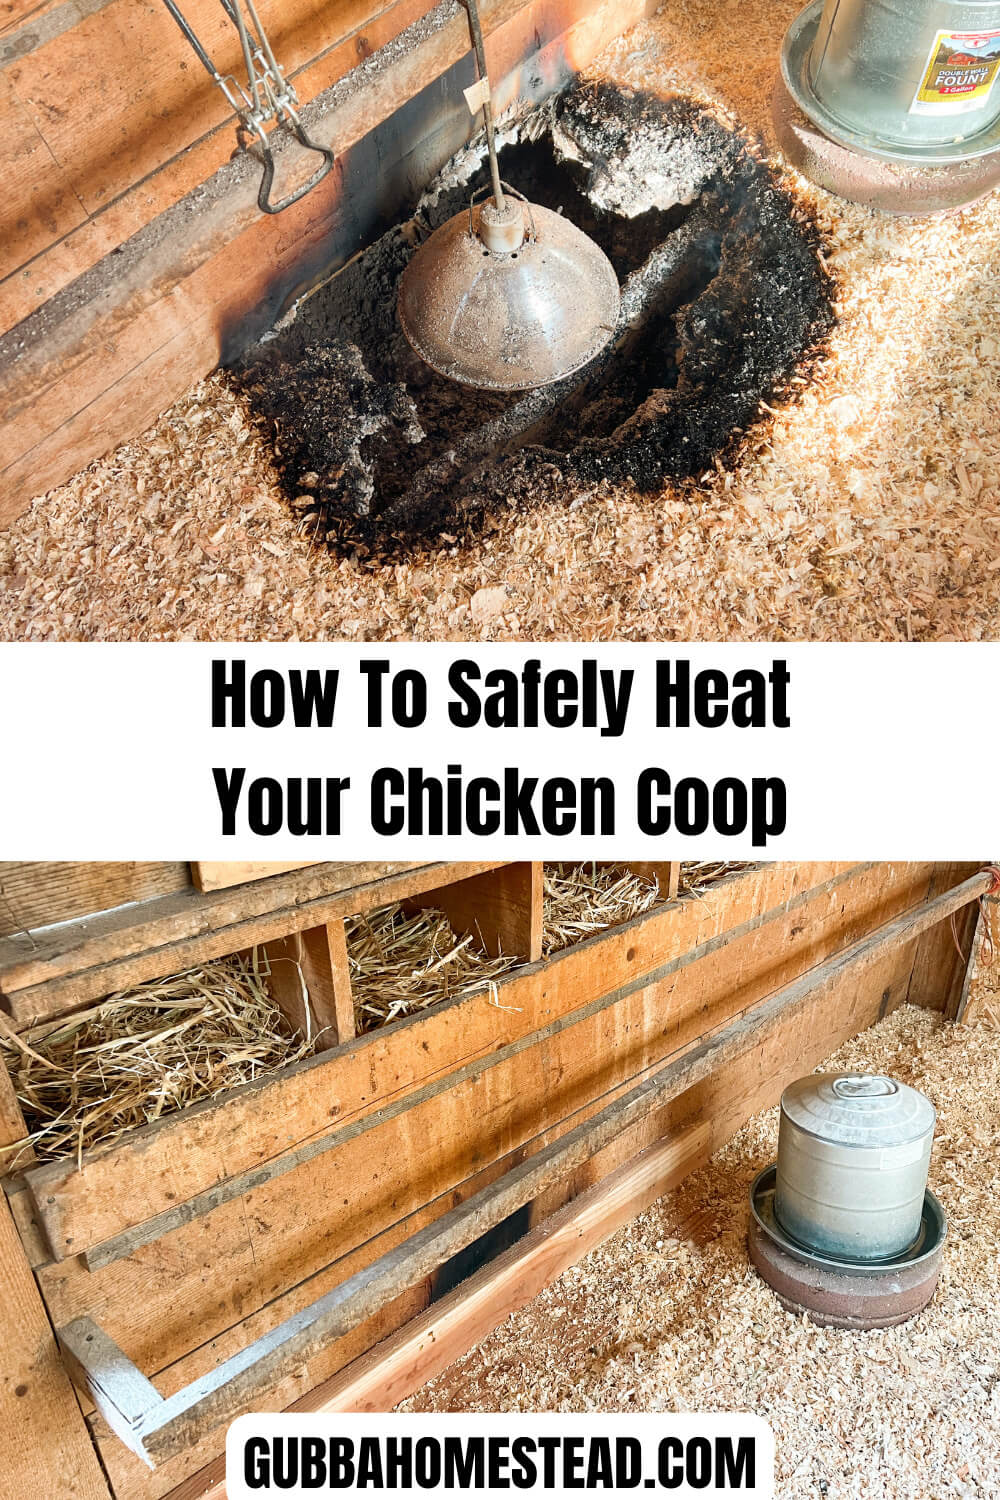 How To Safely Heat Your Chicken Coop